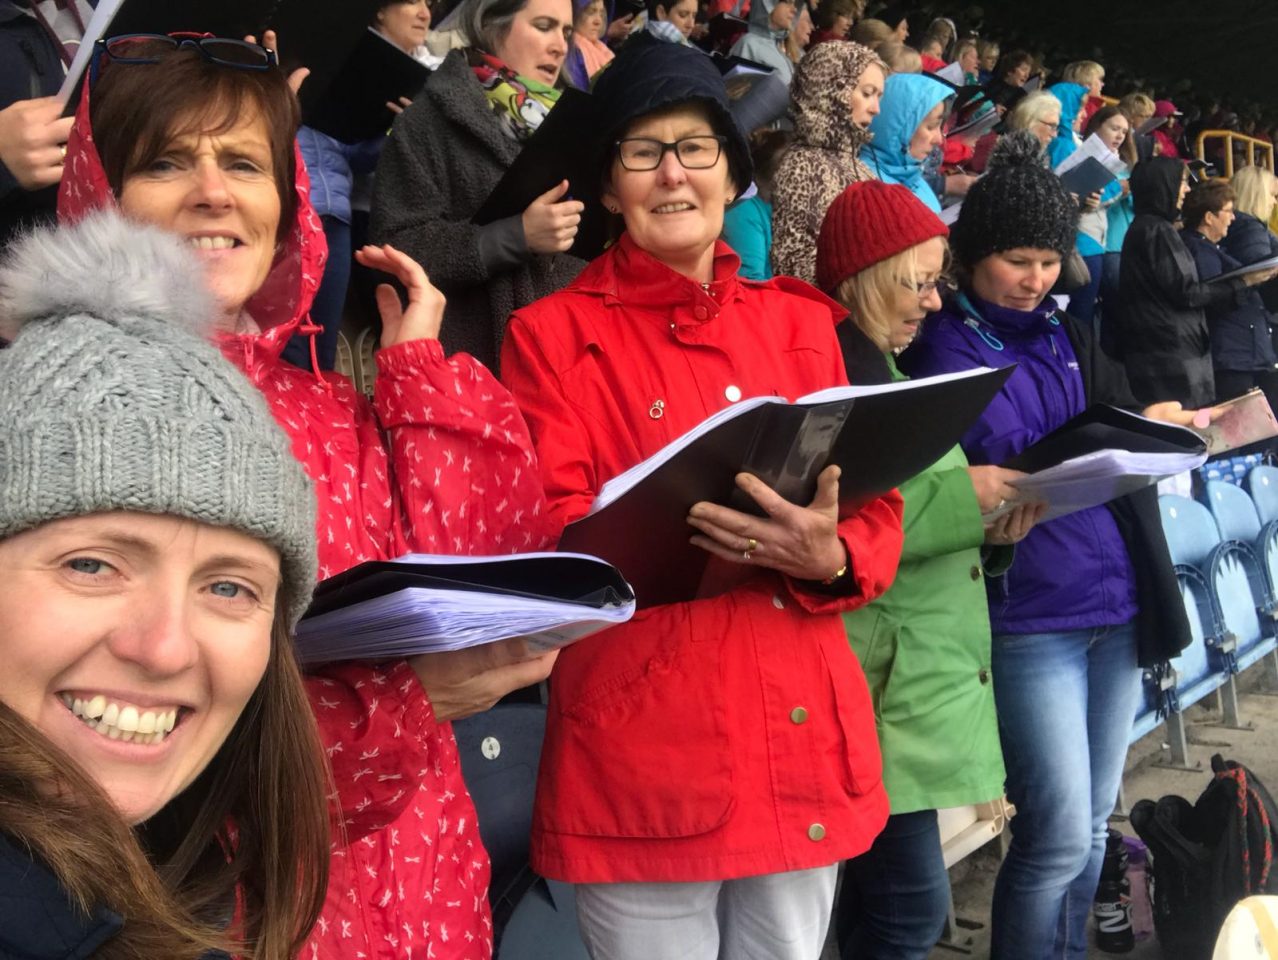 Choir practice at the RDS for the Papal Mass in the Phoenix Park: 28/7/2018.